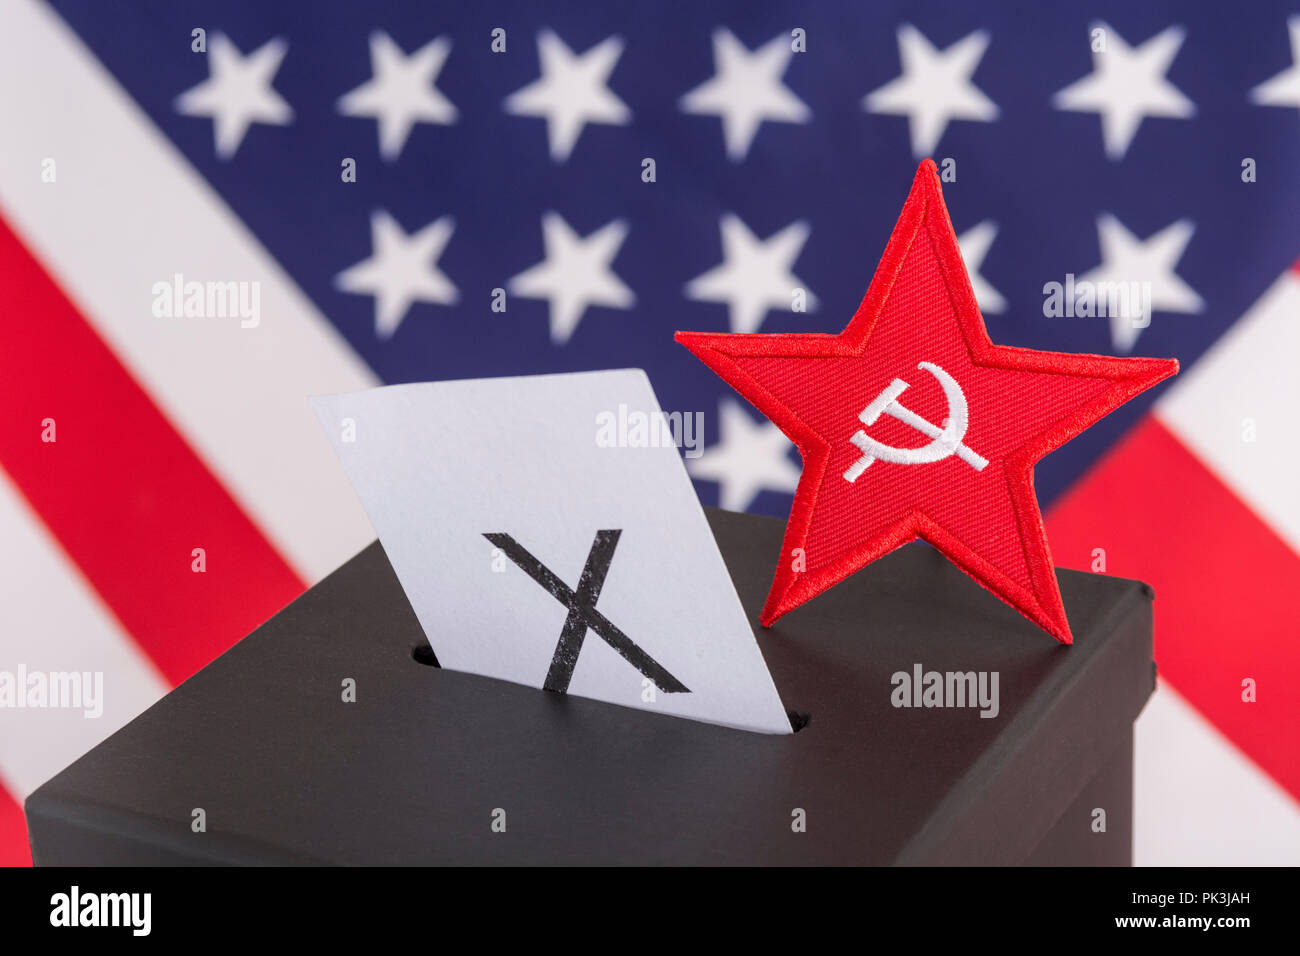 US Presidential Election / Midterm elections 2022. Red Star / Socialists logo (patch) & ballot box. US Radical Left, American marxism & communism. Stock Photo